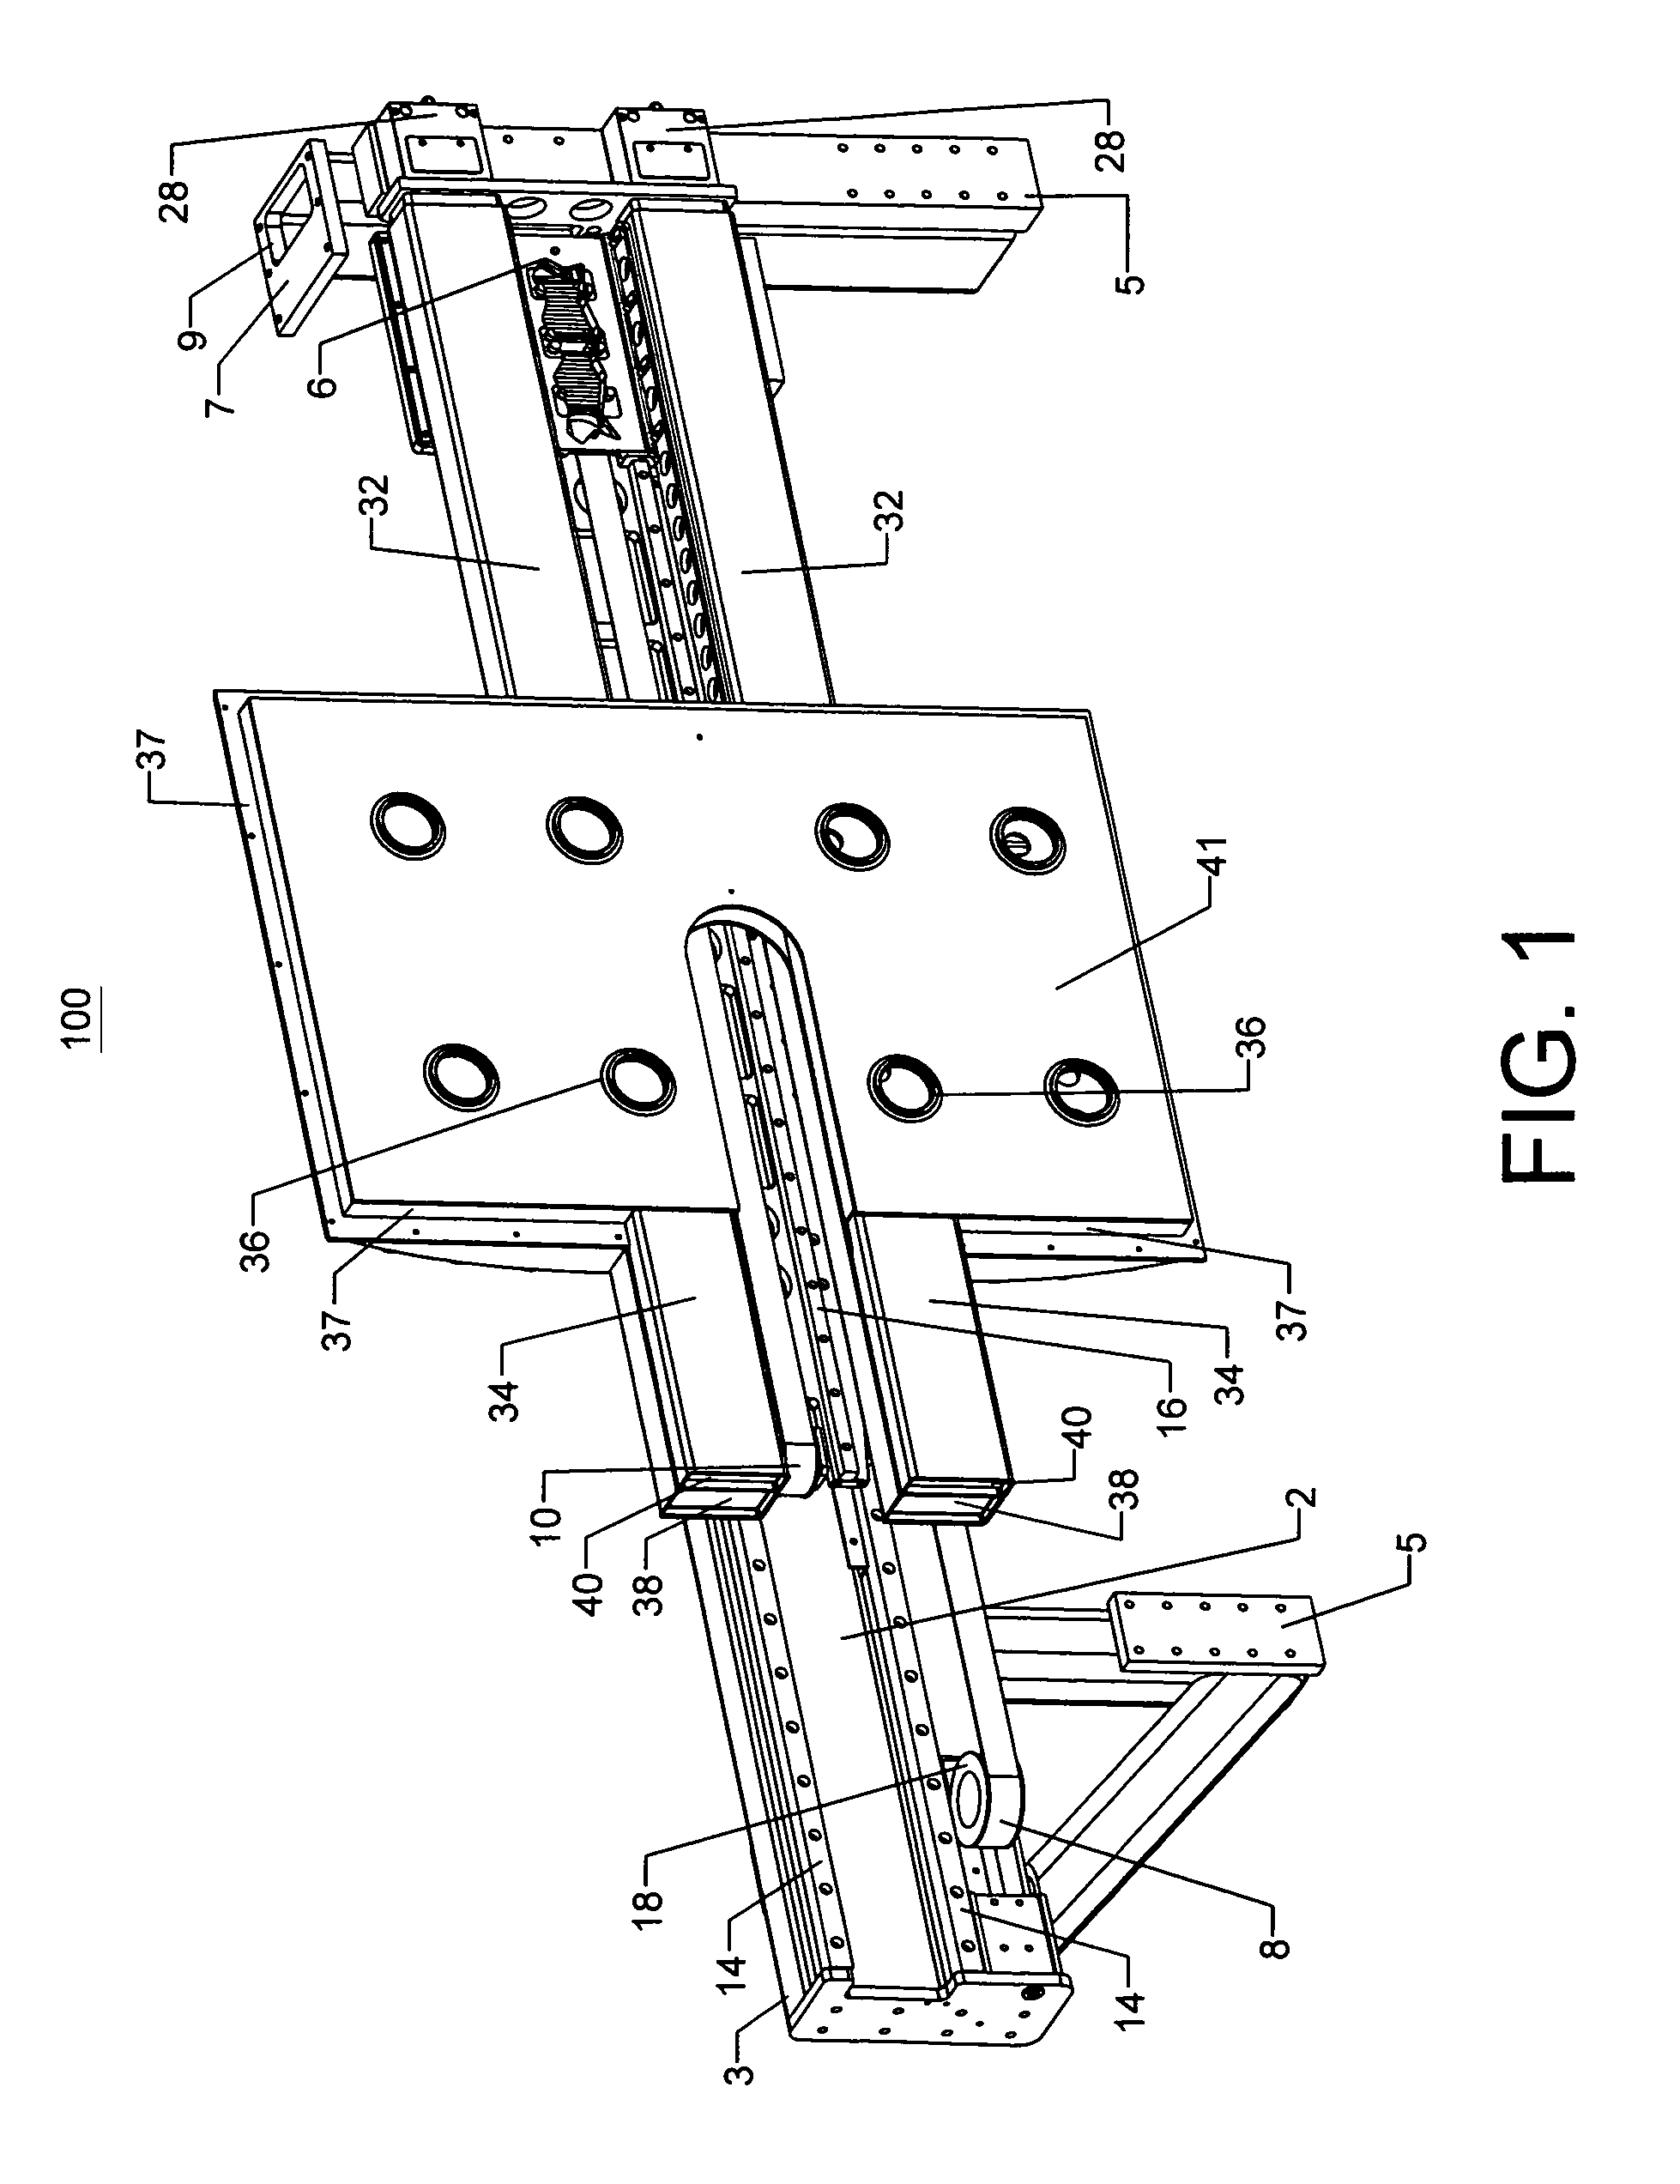 Telescoping article retrieval system with plenum assembly attached to slave belt